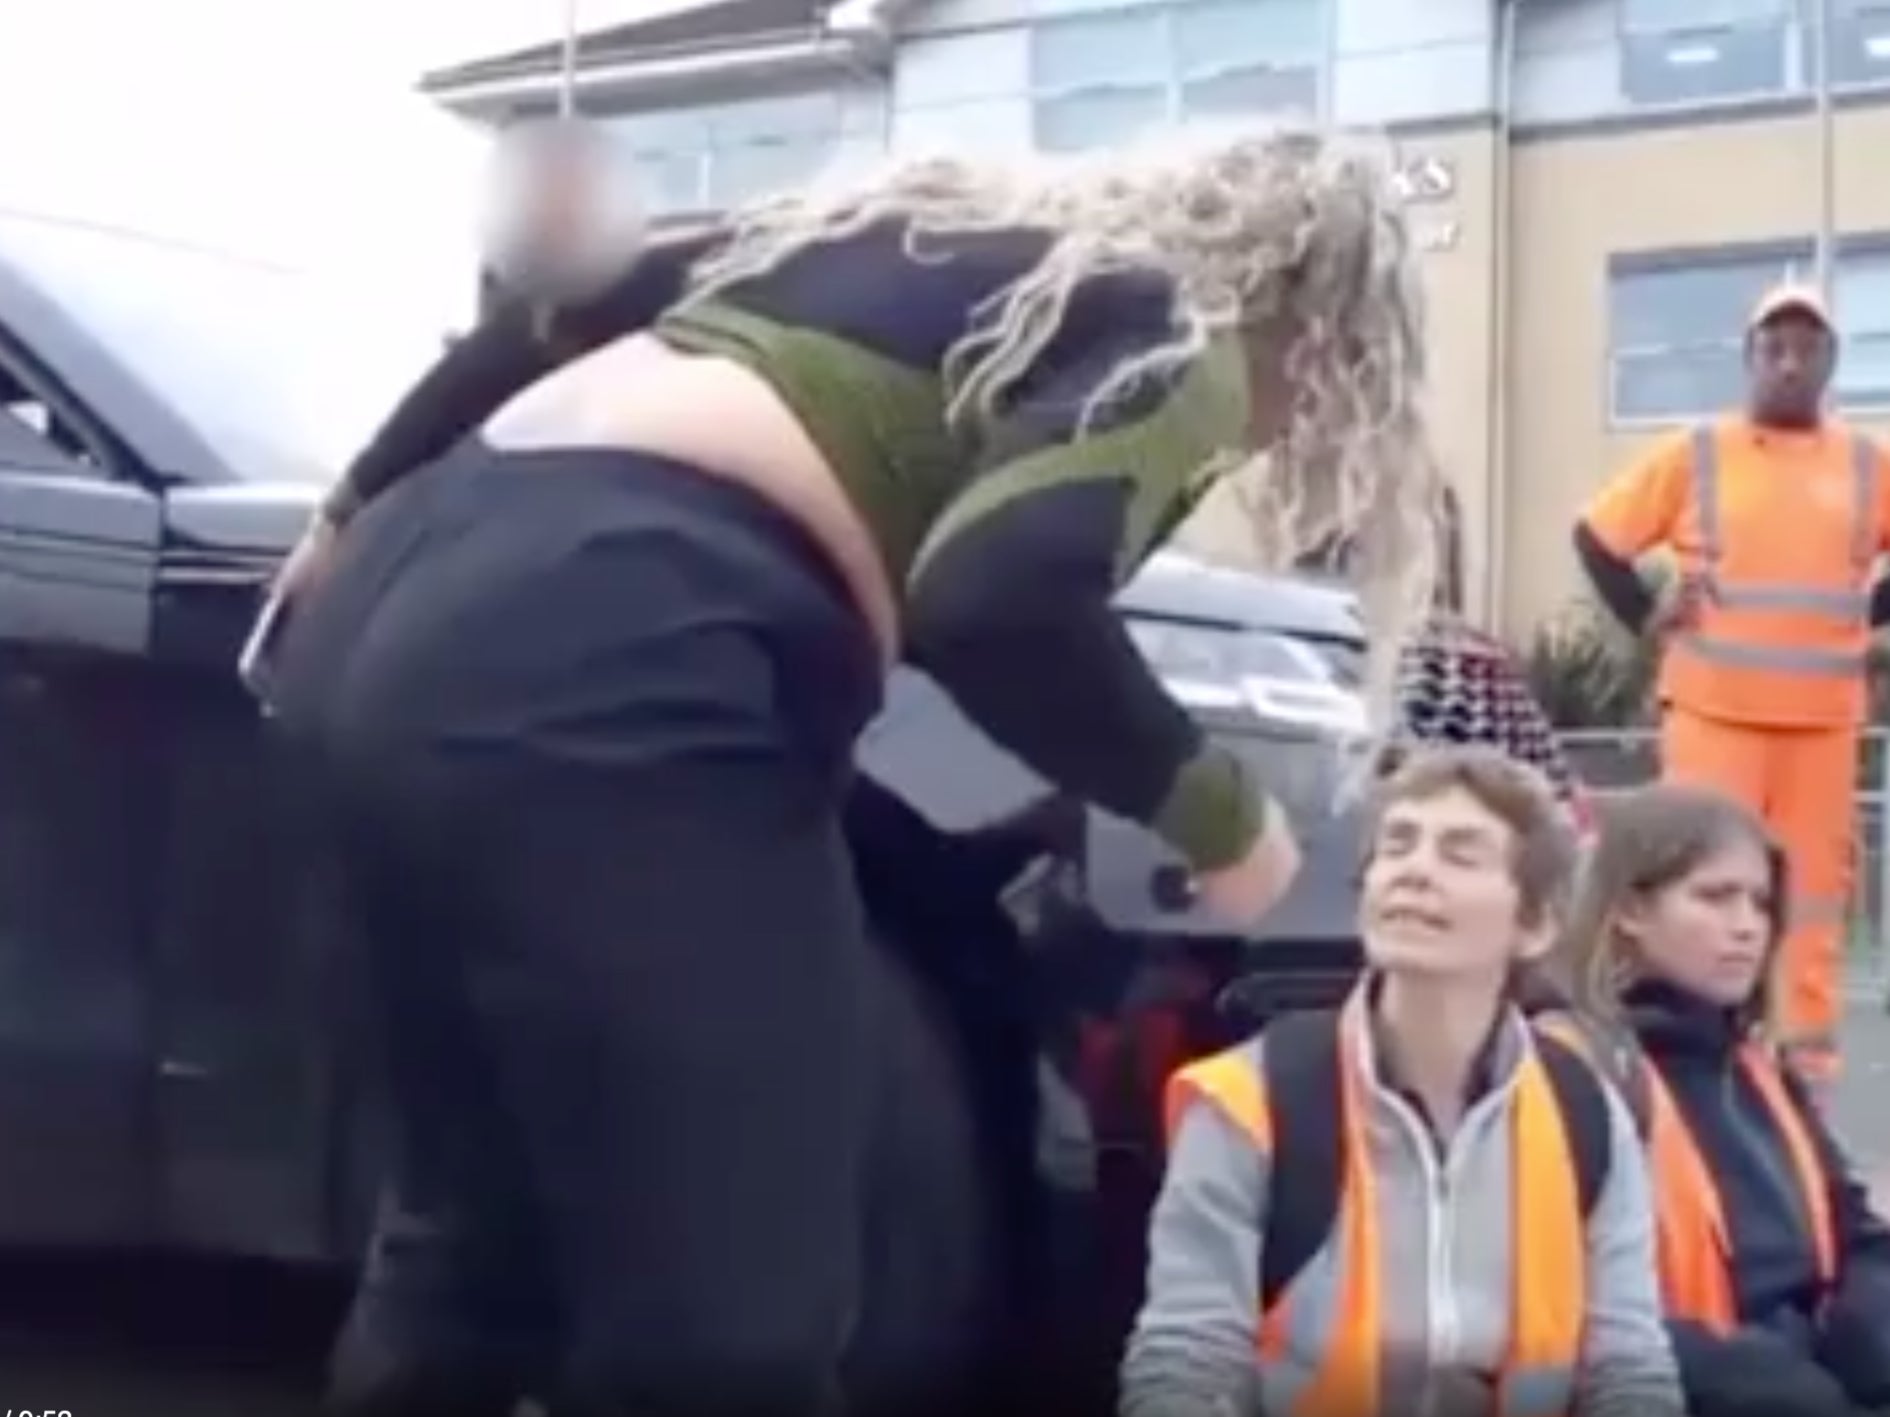 Ms Speid is captured ‘remonstrating’ the Insulate Britain Protestors